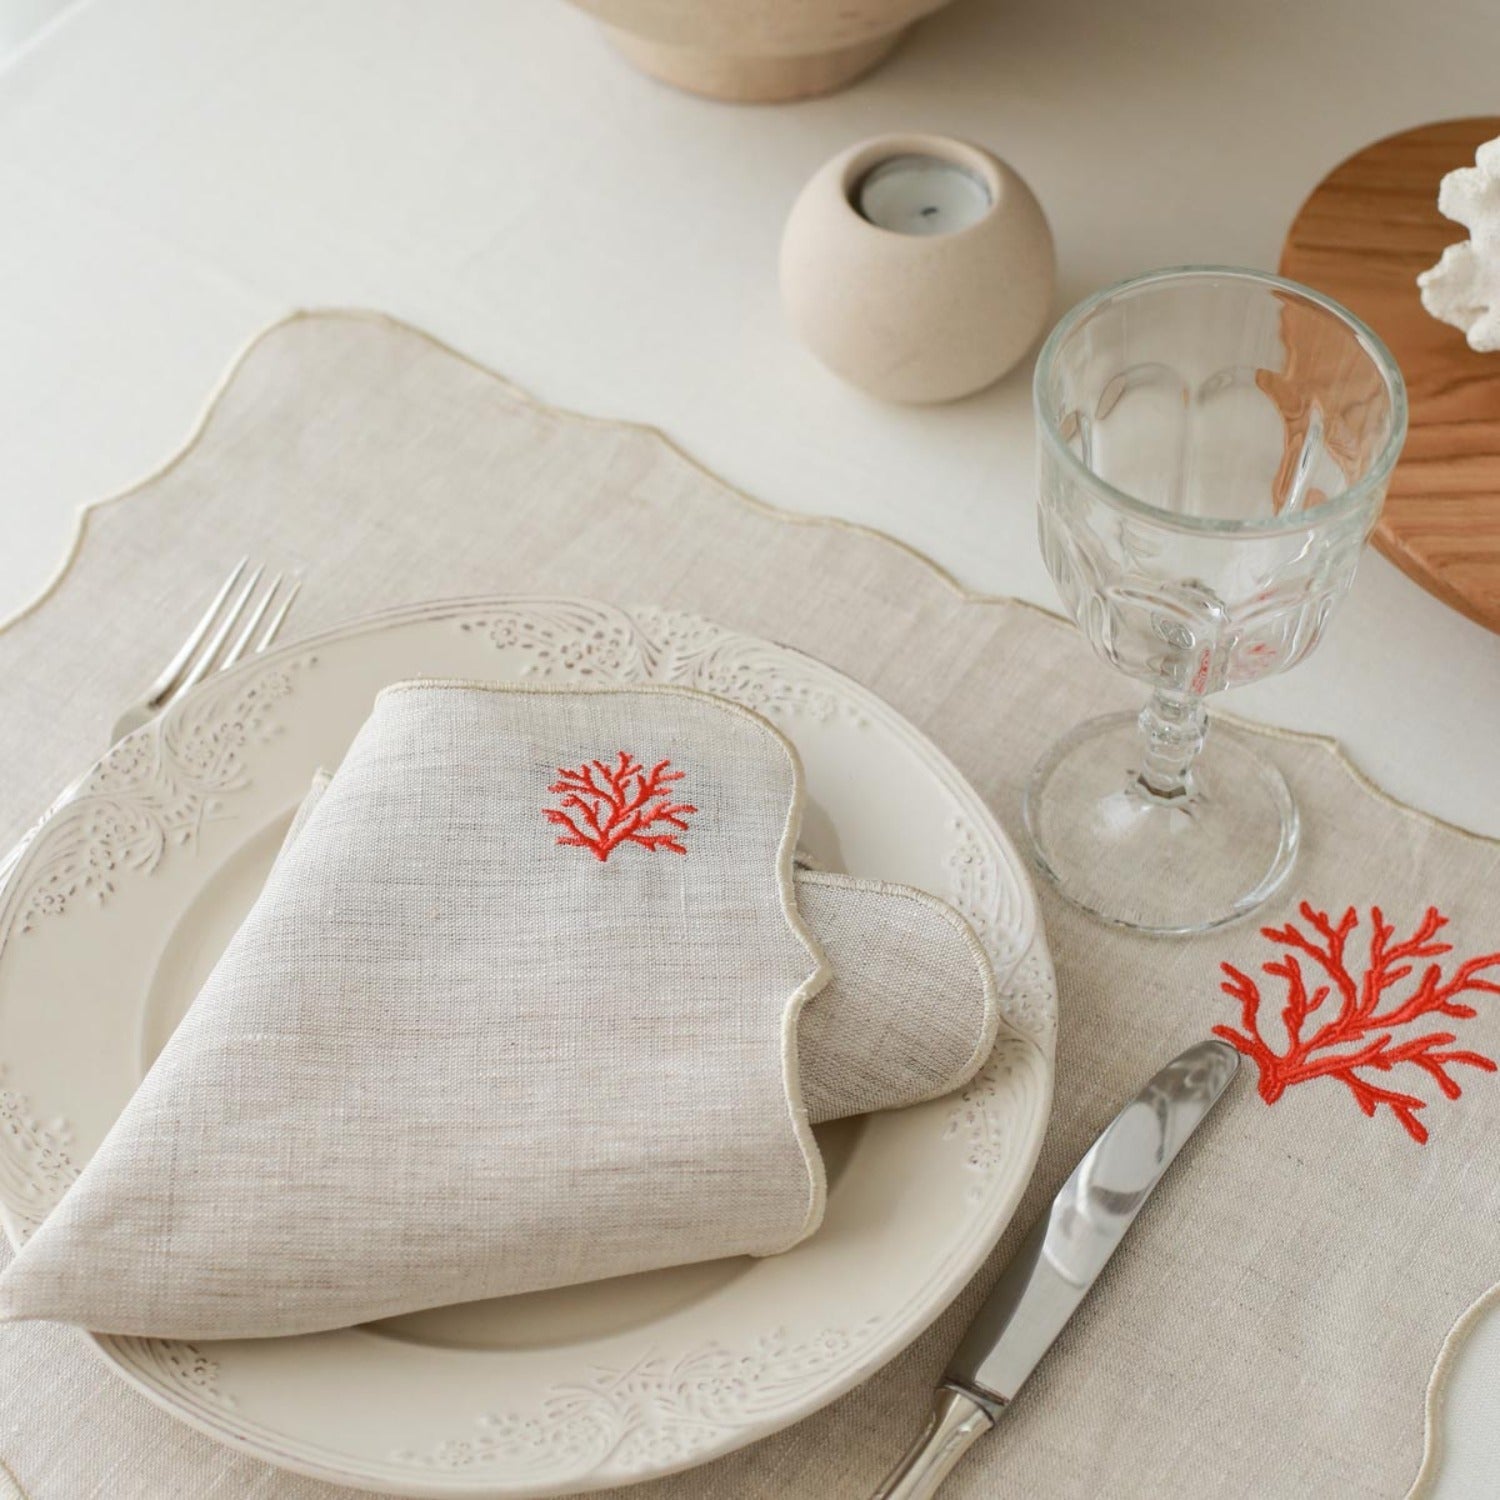 Coral Embroidery Linen Placemats (Set of 2)